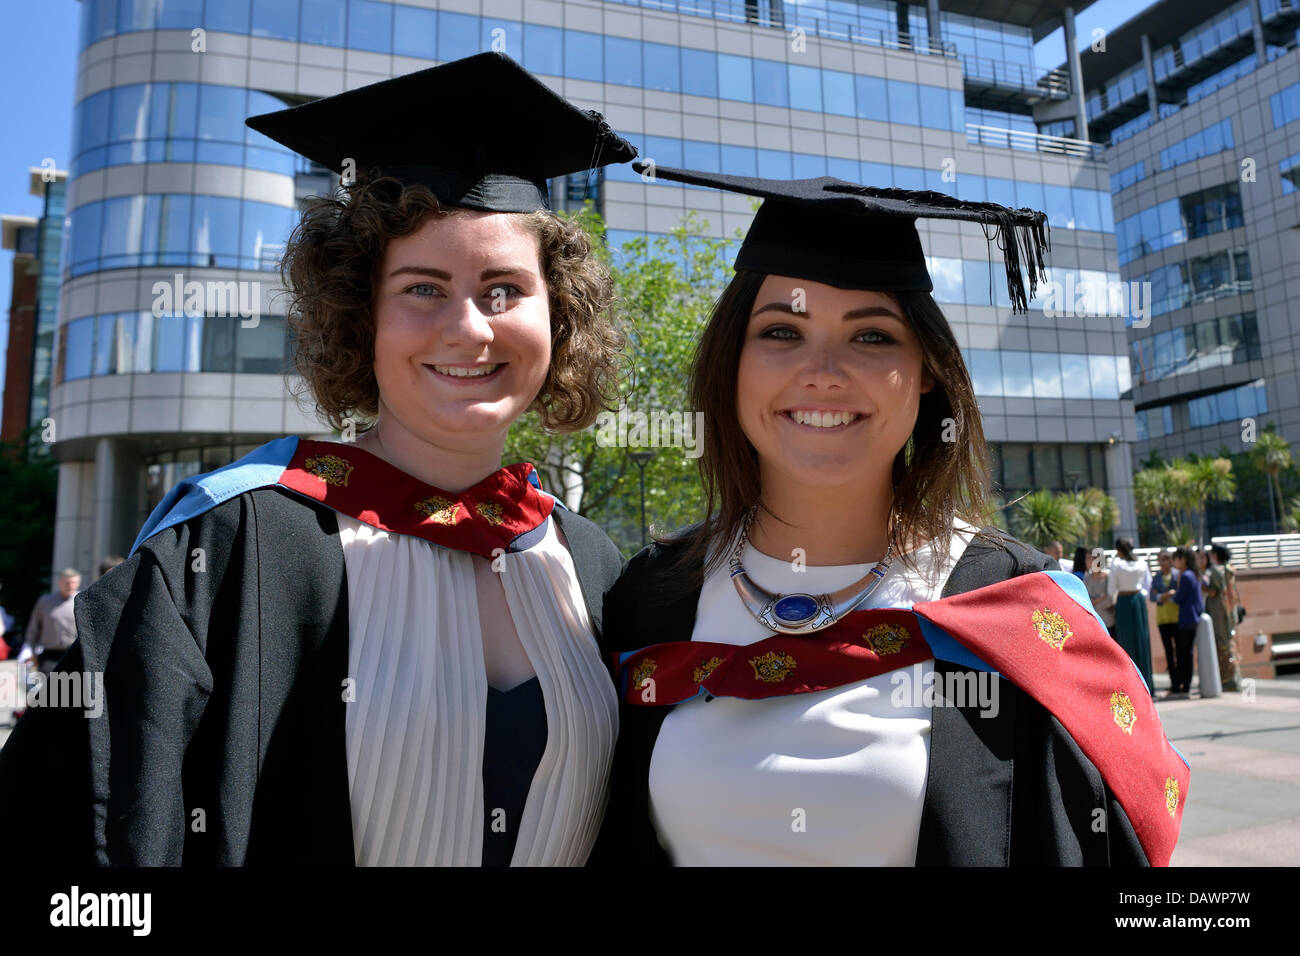 Manchester, UK. 19th July 2013. Manchester Metropolitan University Graduation. Clare O'Neil and Samantha Thorn both aged 21 are among those receiving their degrees at The Bridgewater Hall, Manchester. They both receive First Class Degrees in Health Care Science. Credit:  John Fryer/Alamy Live News Stock Photo